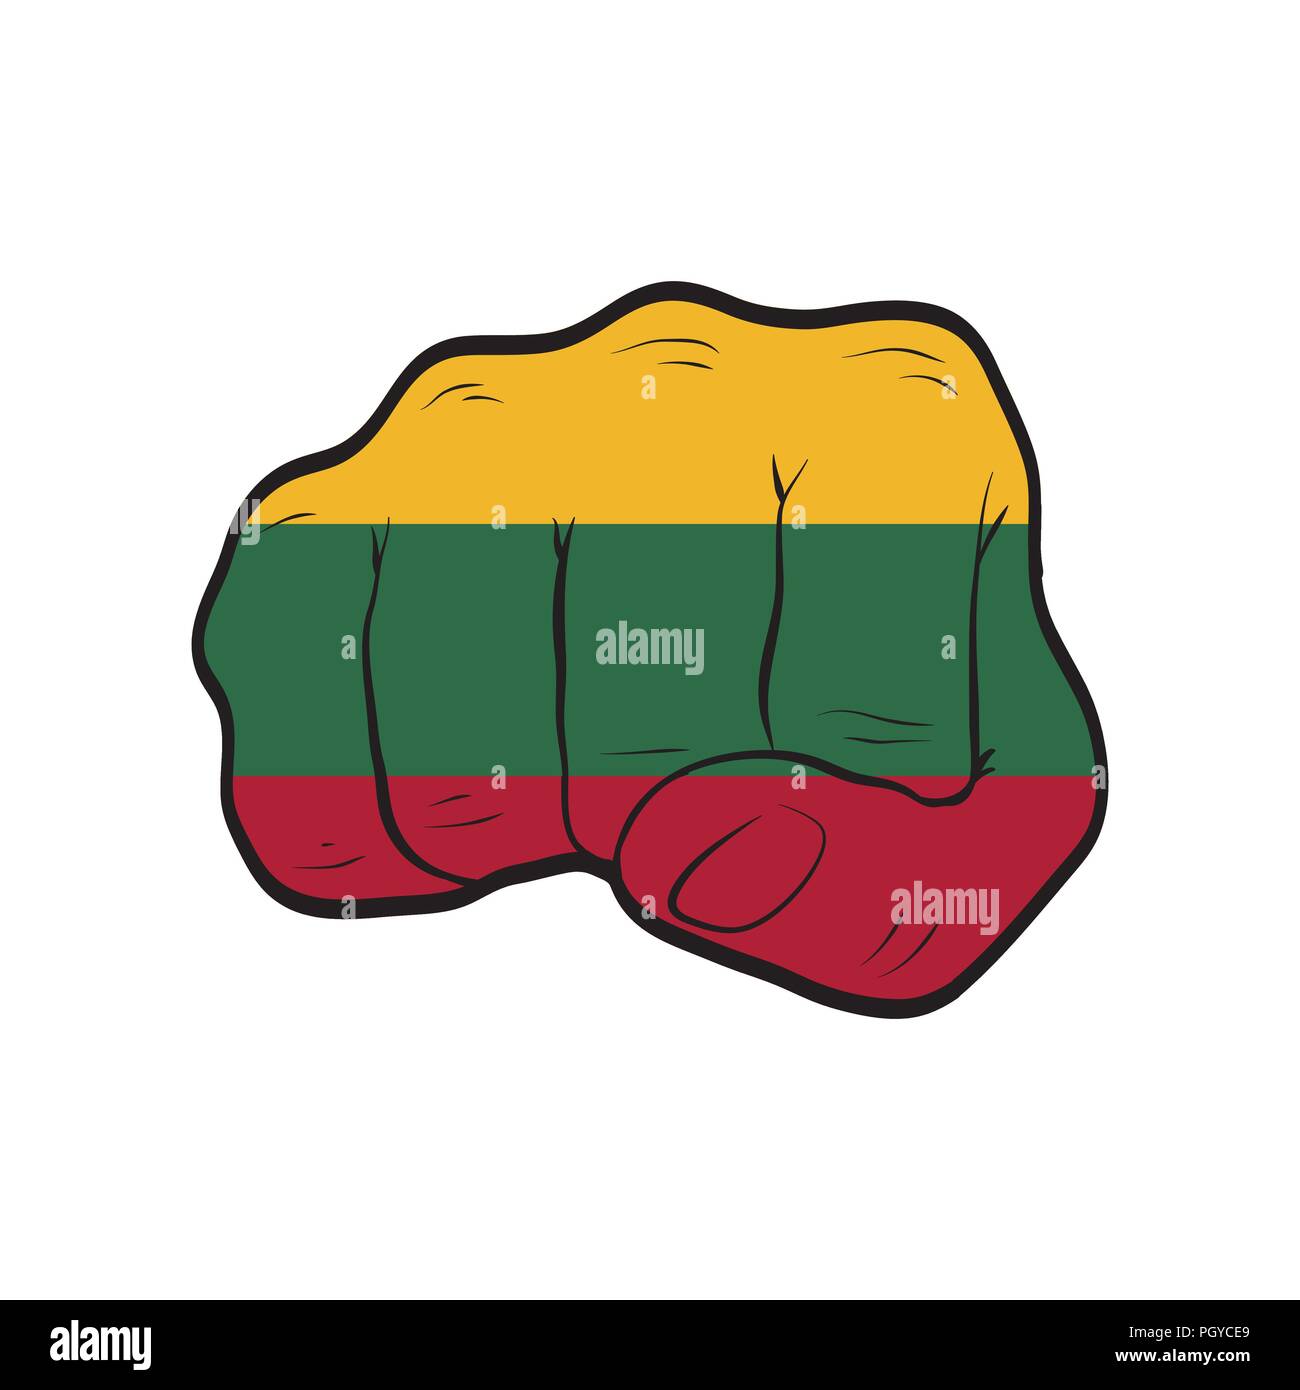 Lithuania flag on a clenched fist. Strength, Power, Protest concept Stock Vector